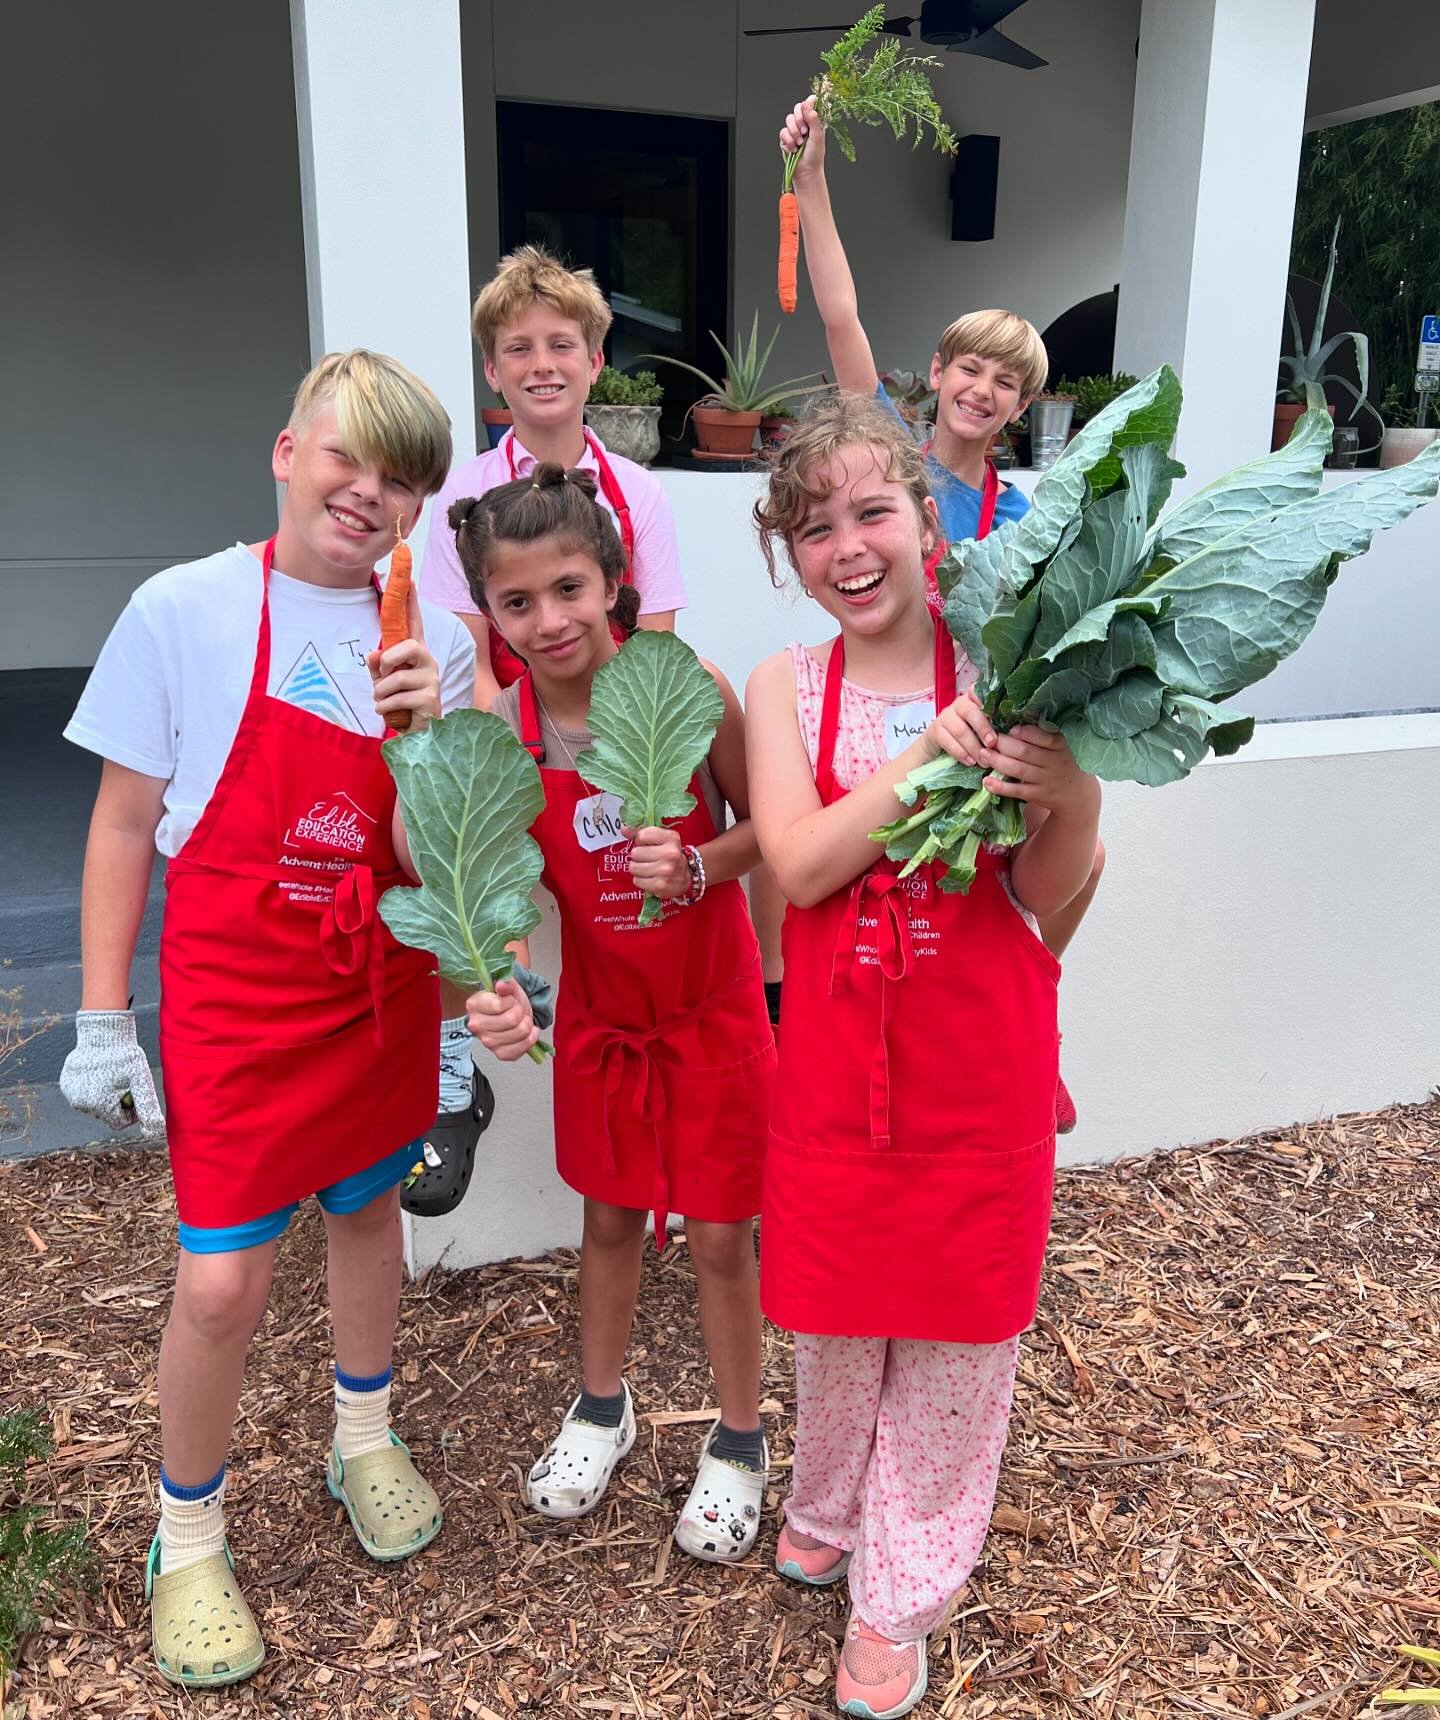 Say hello to Park School! These 5th graders dove headfirst into the seed-to-table experience and had a blast learning the story of Southern food. Scroll through if you want to feel like you went on the field trip too! 

On the menu: Johnny cakes, suc